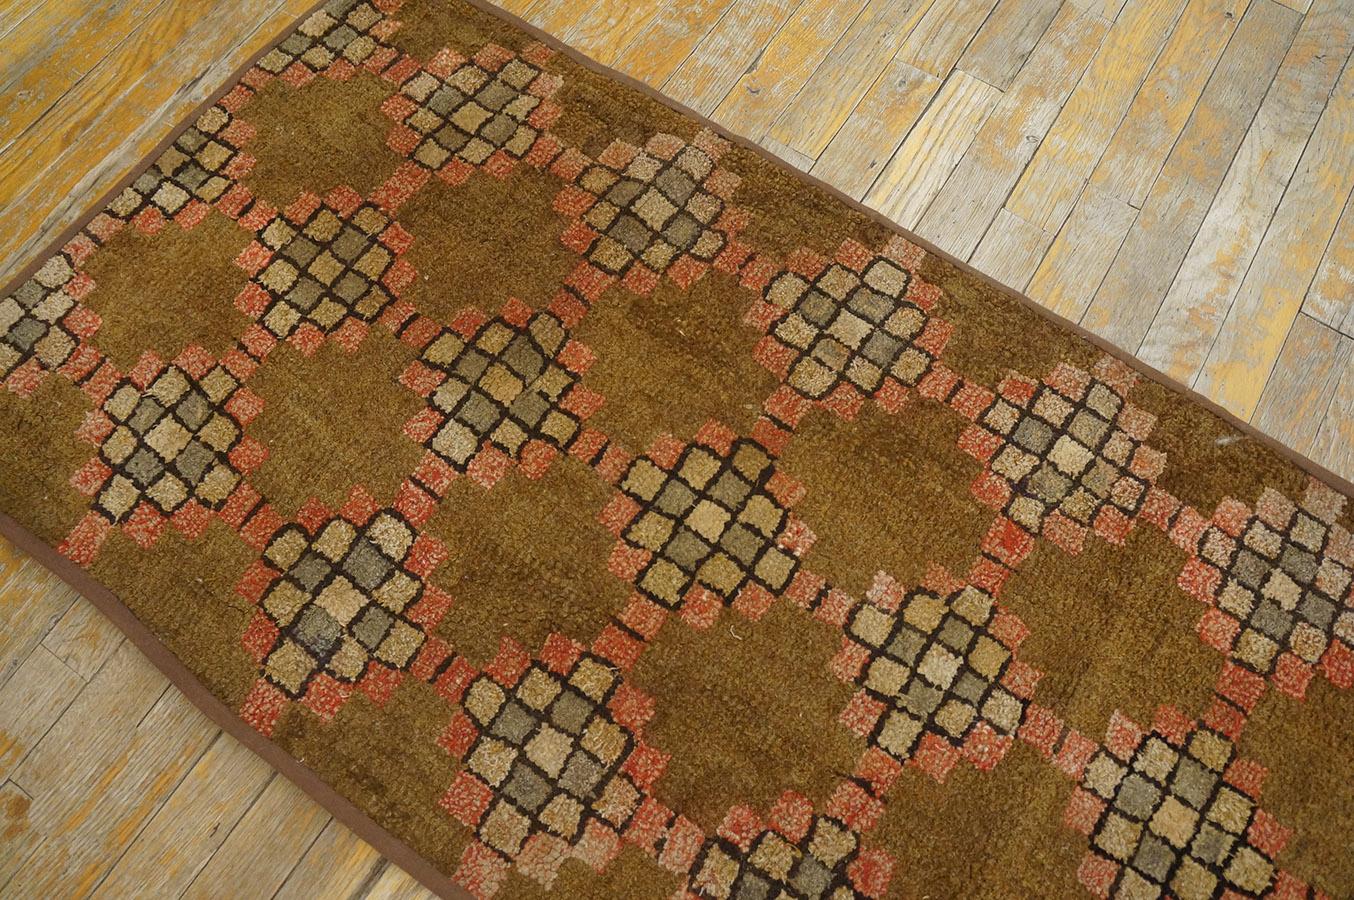 Wool Mid 20th Century American Hooked Rug ( 2' 3'' x 6' 4'' - 68 x 193 cm ) For Sale